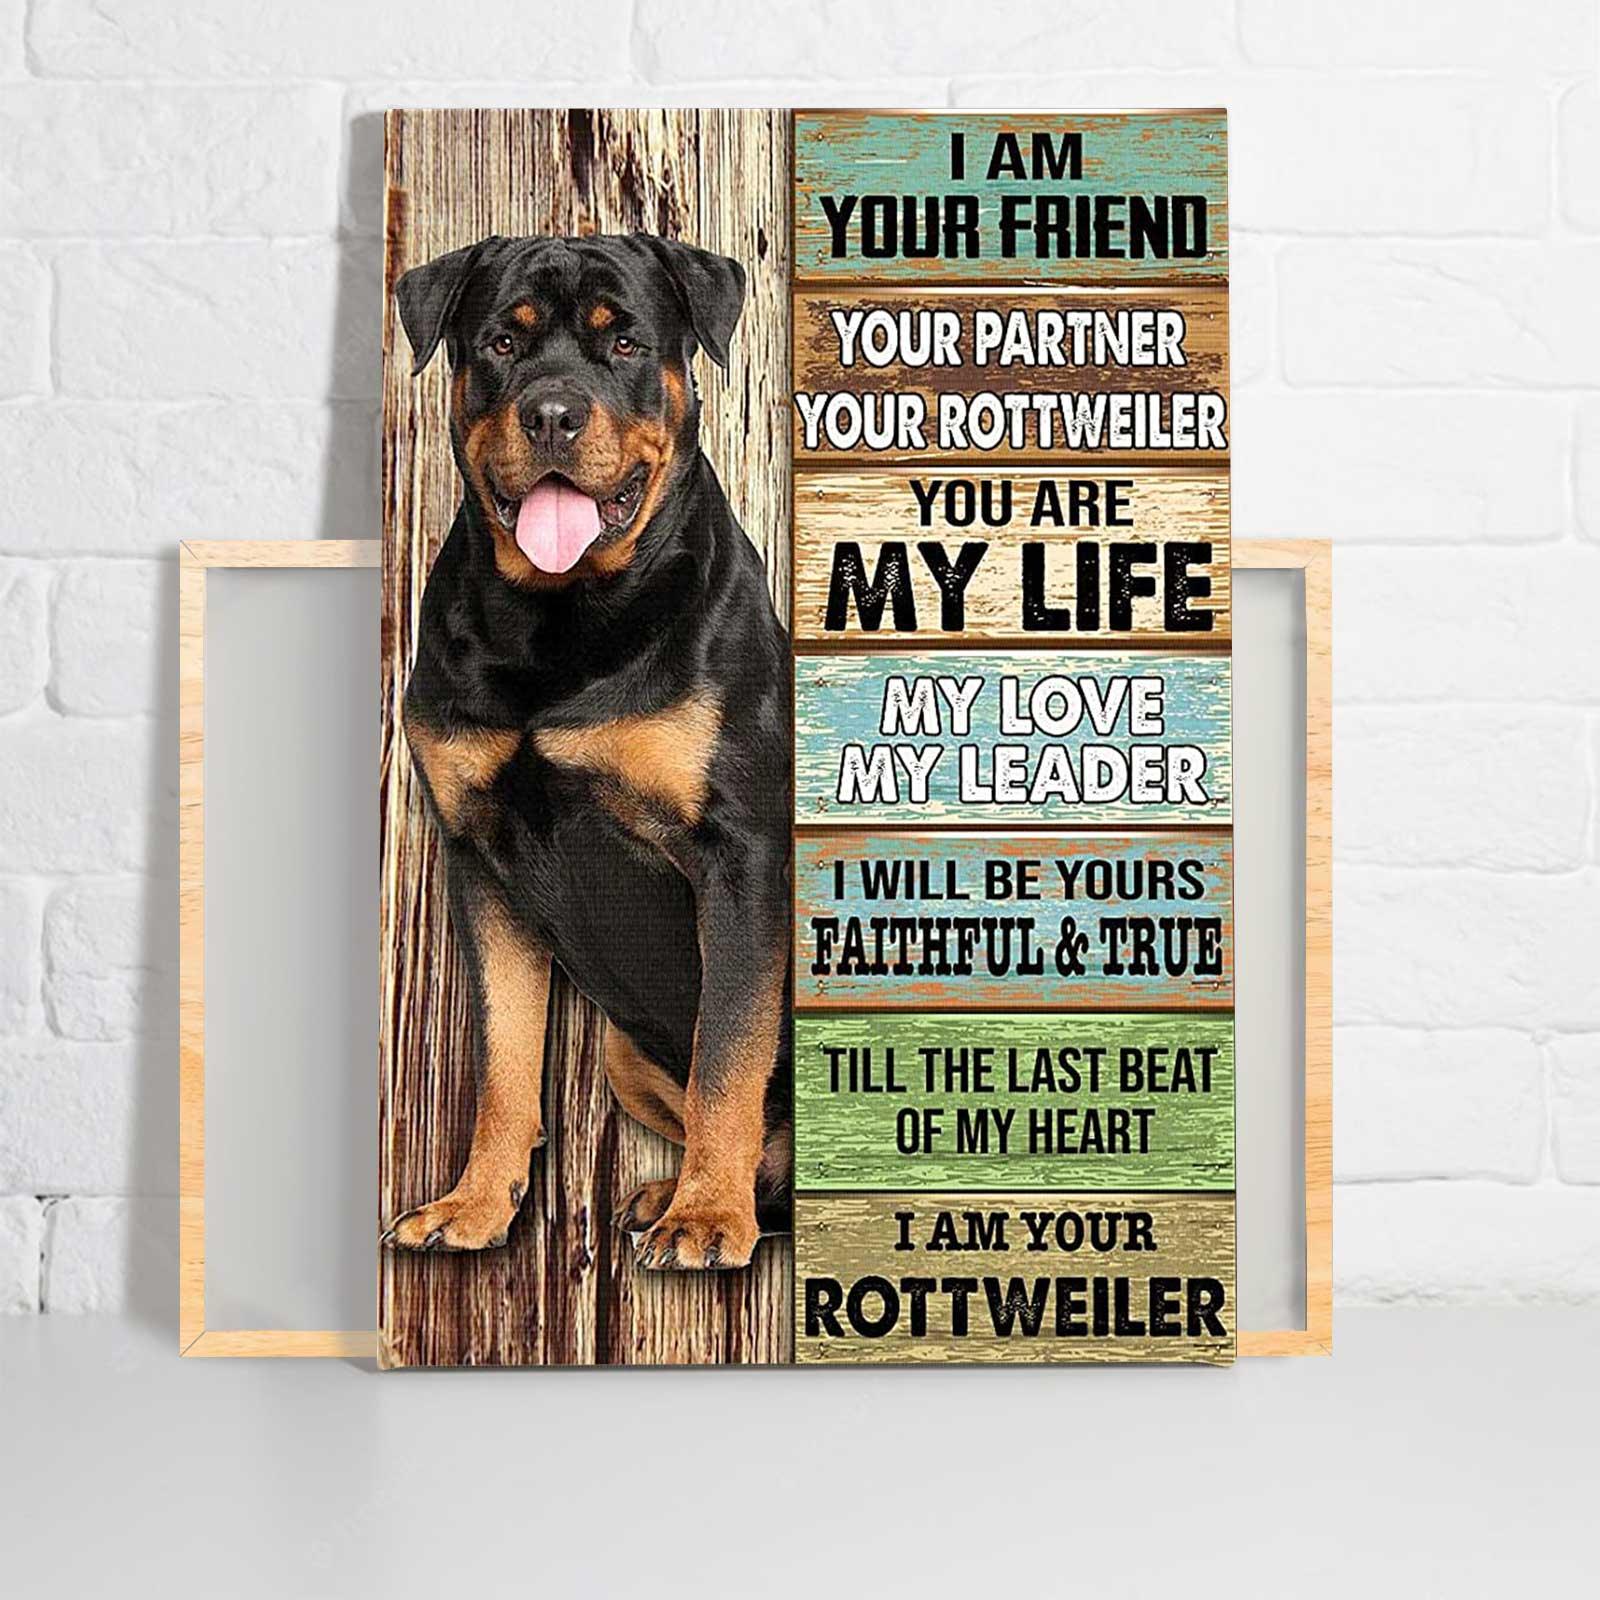 Rottweiler Portrait Canvas, I Am Your Friend Your Partner Your Rottweiler Portrait Canvas, Wall Decor Visual Art - Perfect Gift For Dog Lovers, Family - Amzanimalsgift